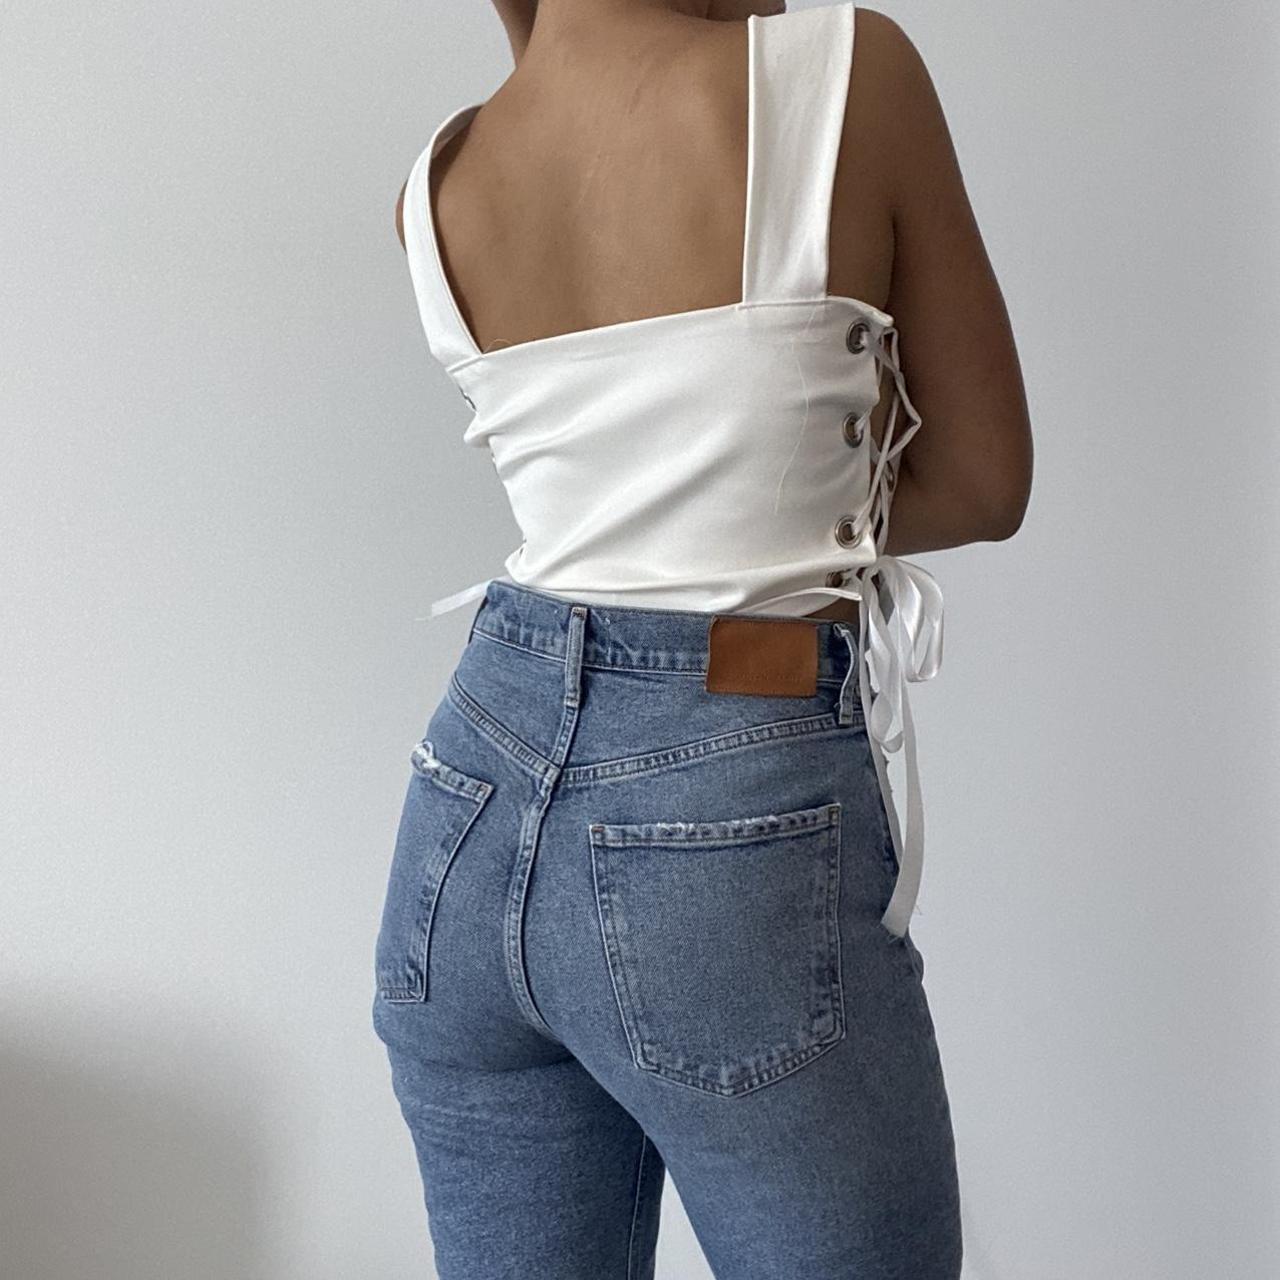 ARE YOU AM I Women's White Corset | Depop